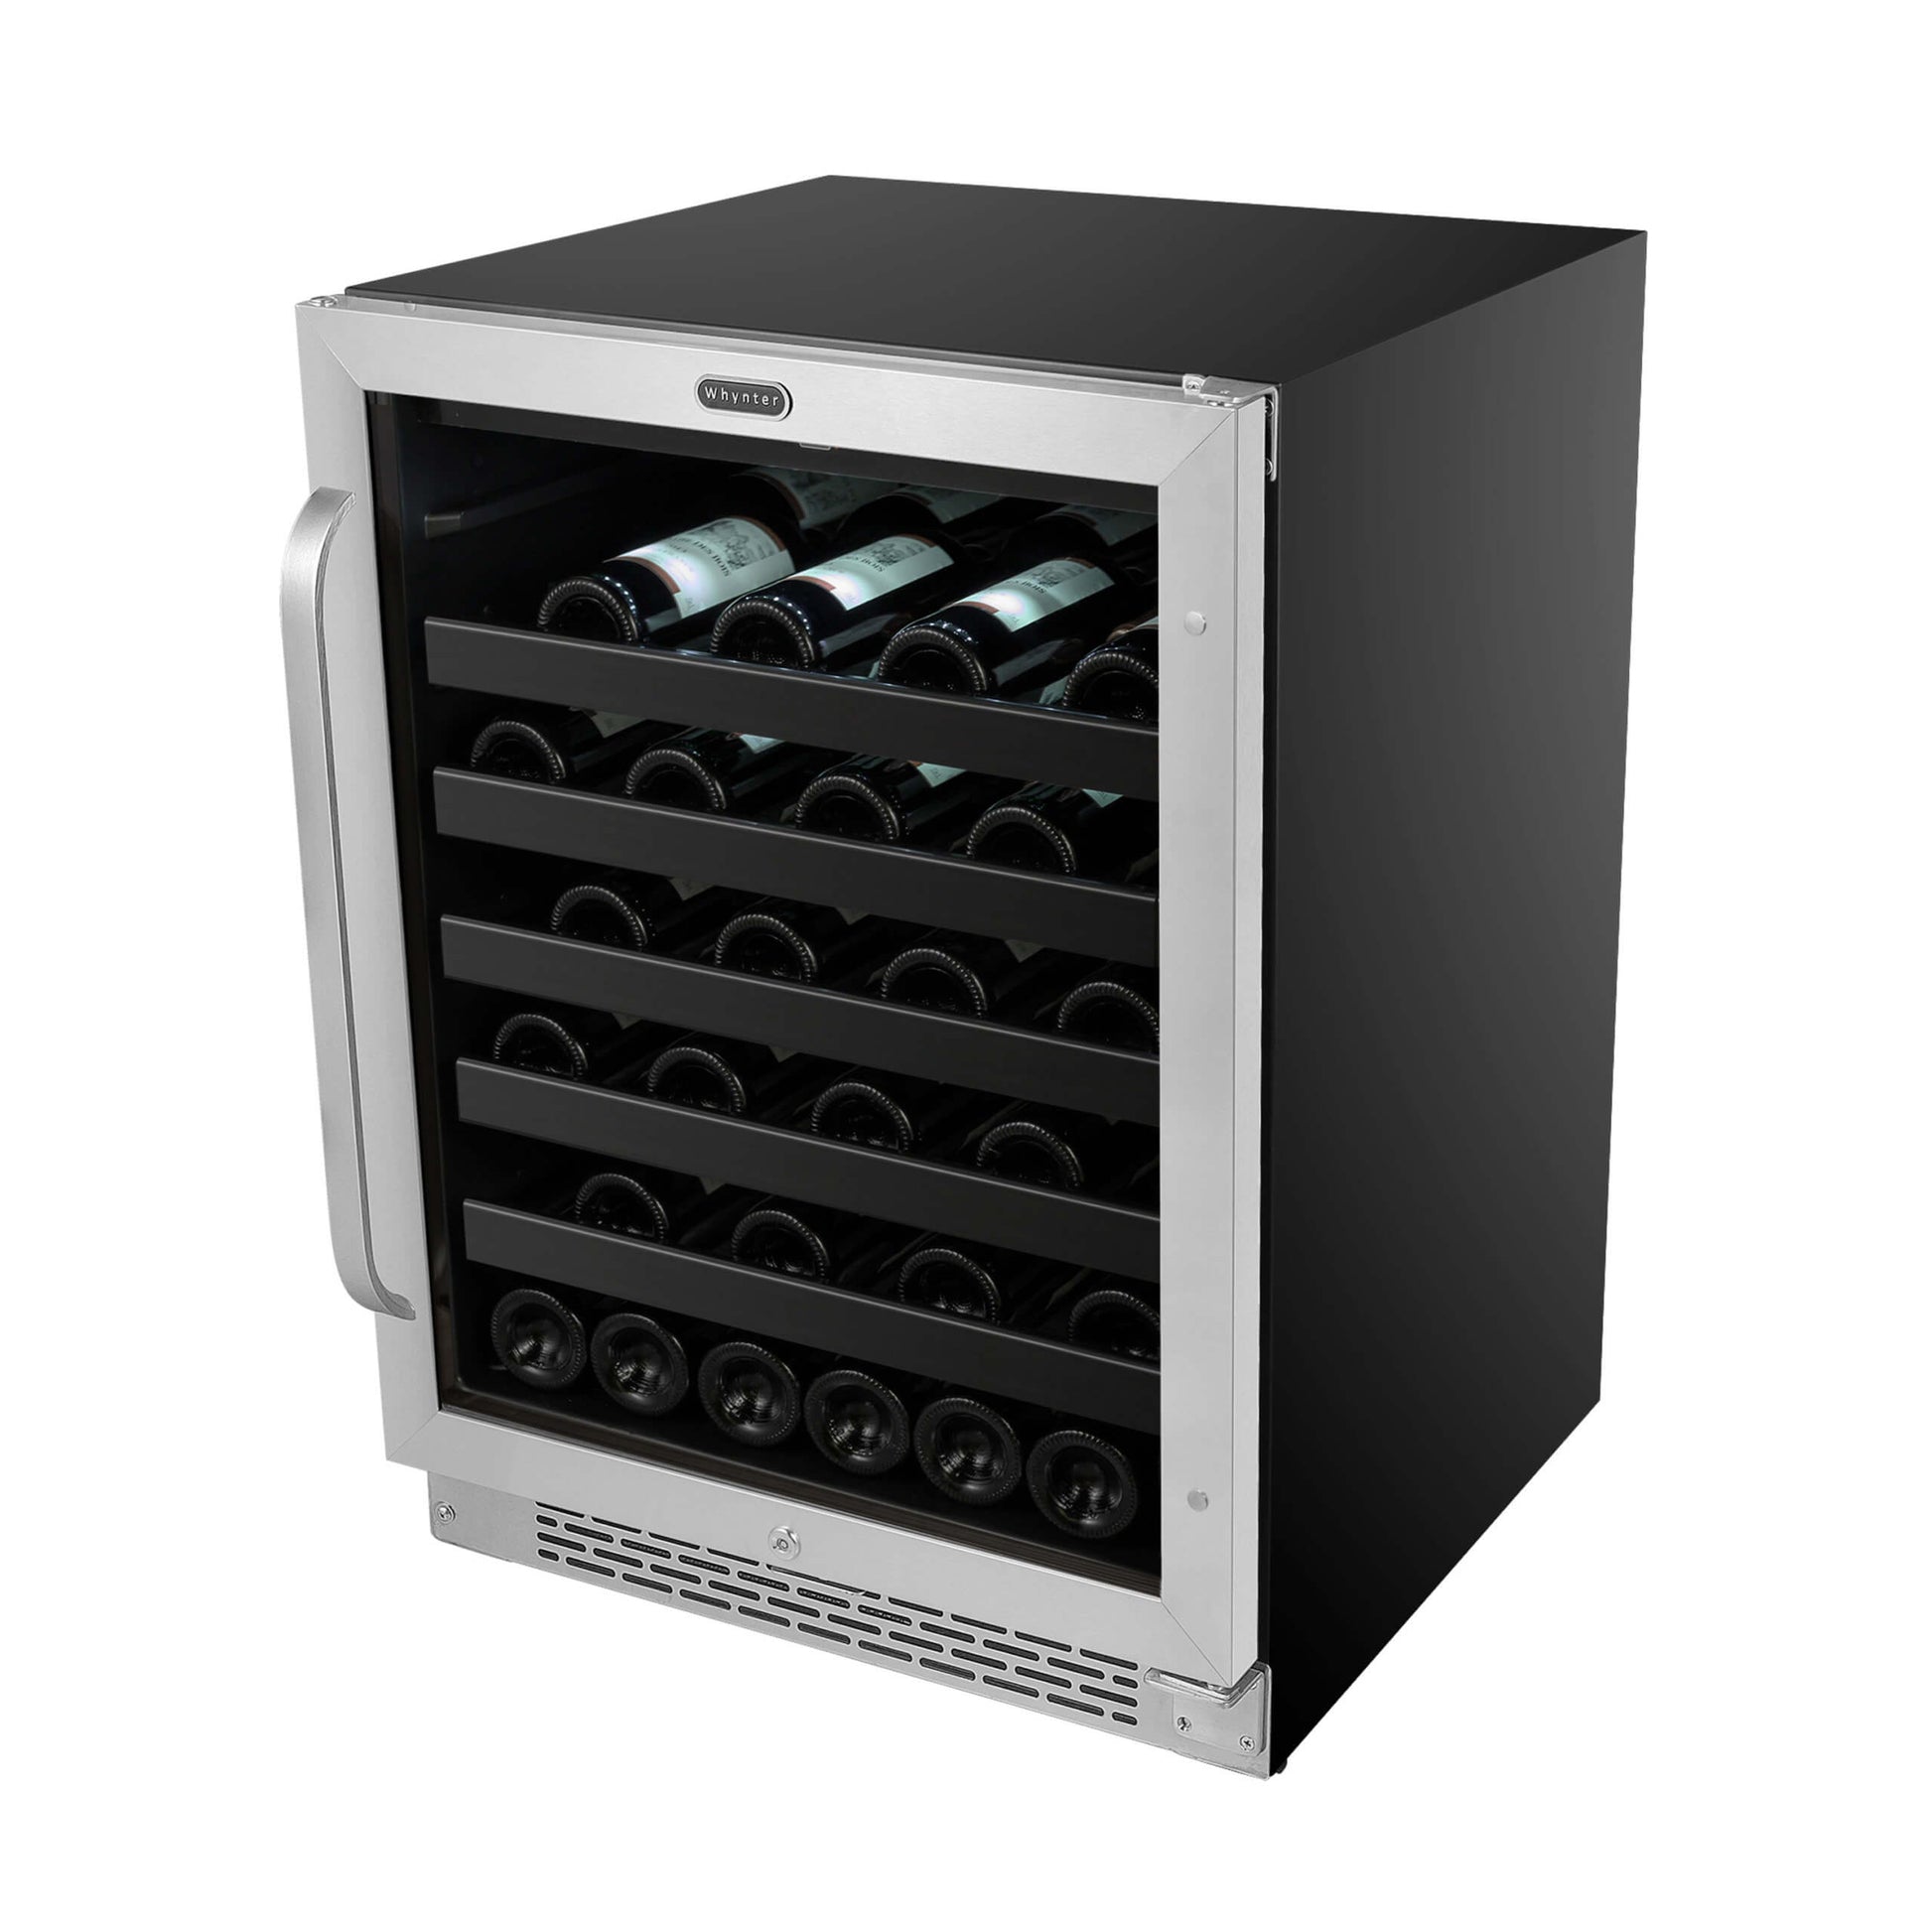 Whynter Wine Refrigerator Whynter BWR-408SB 24 inch Built-In 46 Bottle Undercounter Stainless Steel Wine Refrigerator with Reversible Door, Digital Control, Lock, and Carbon Filter